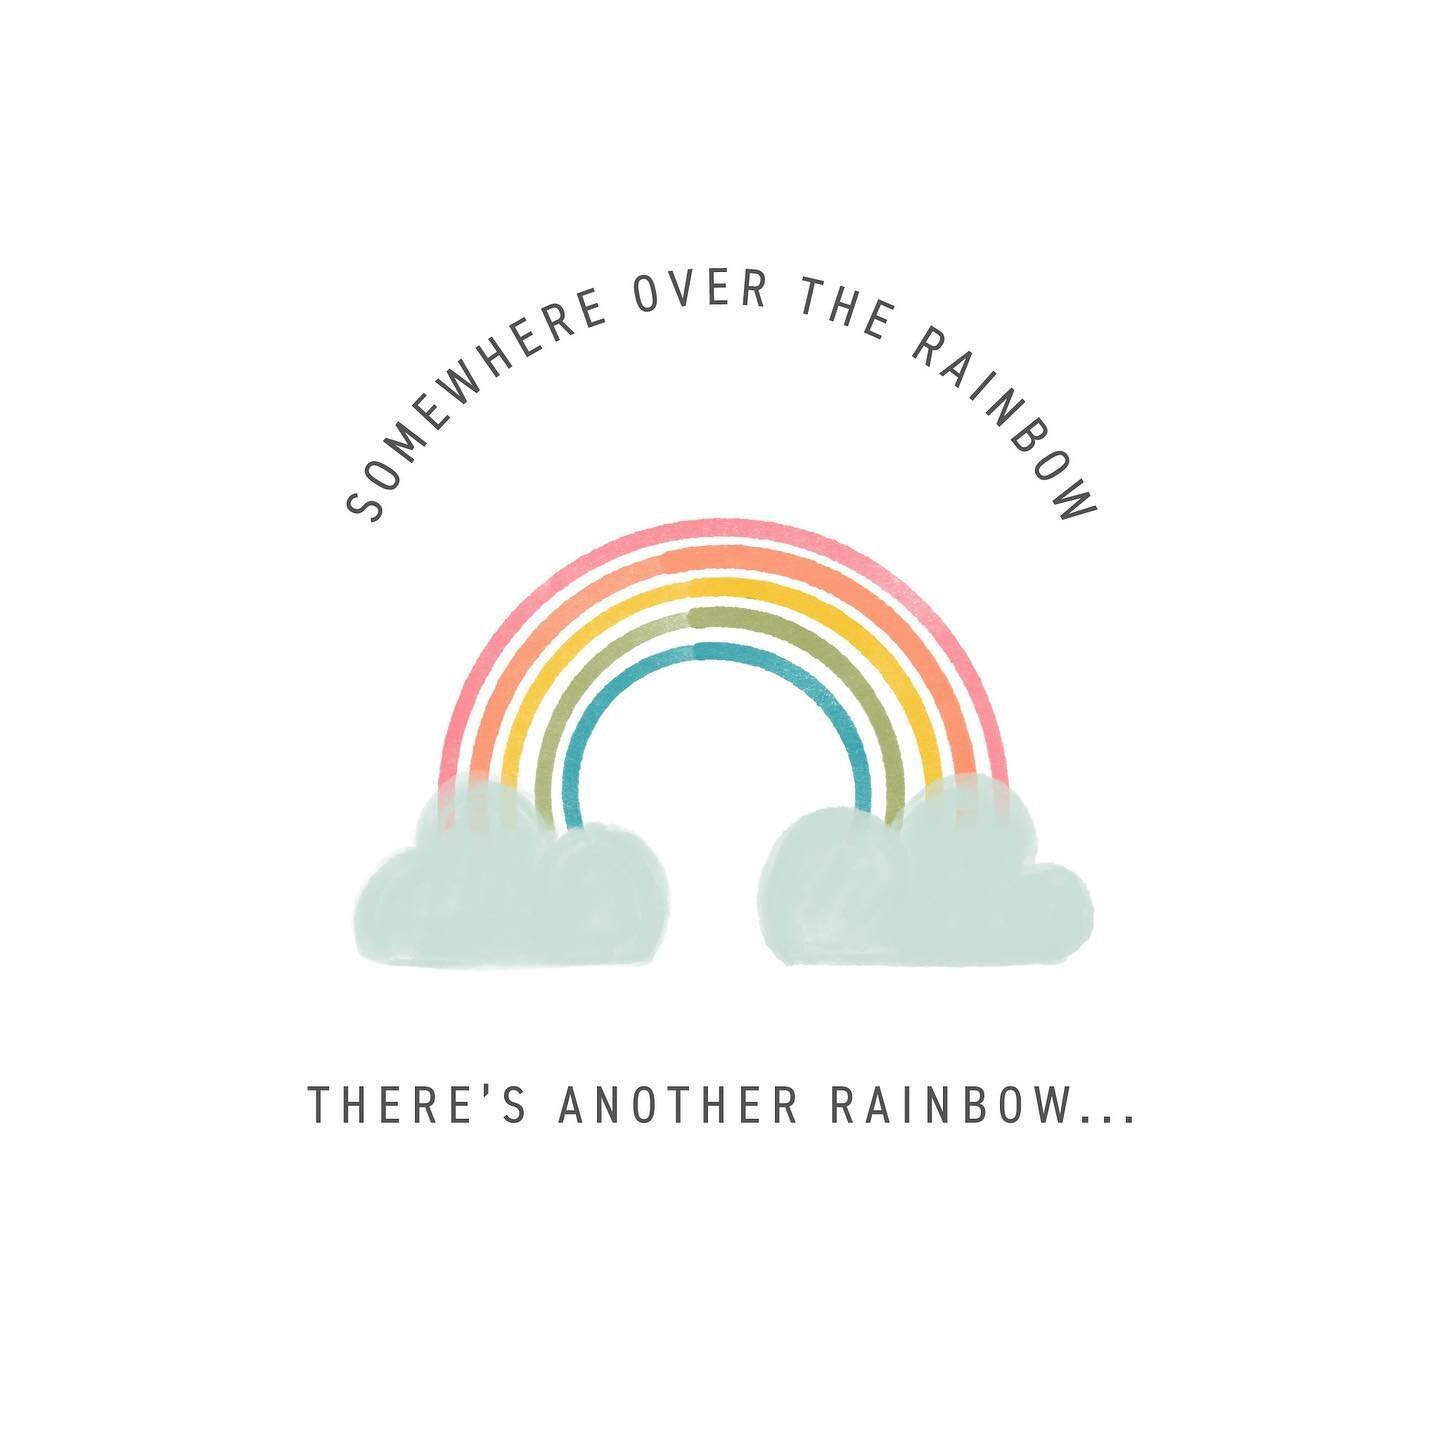 I have no idea what he meant by this, but as always the great Tobias F&uuml;nke and constant binge rewatching of Arrested Development is getting me through this continued quarantine. Enjoy this deep cut quote. Also...I really like to draw rainbows so